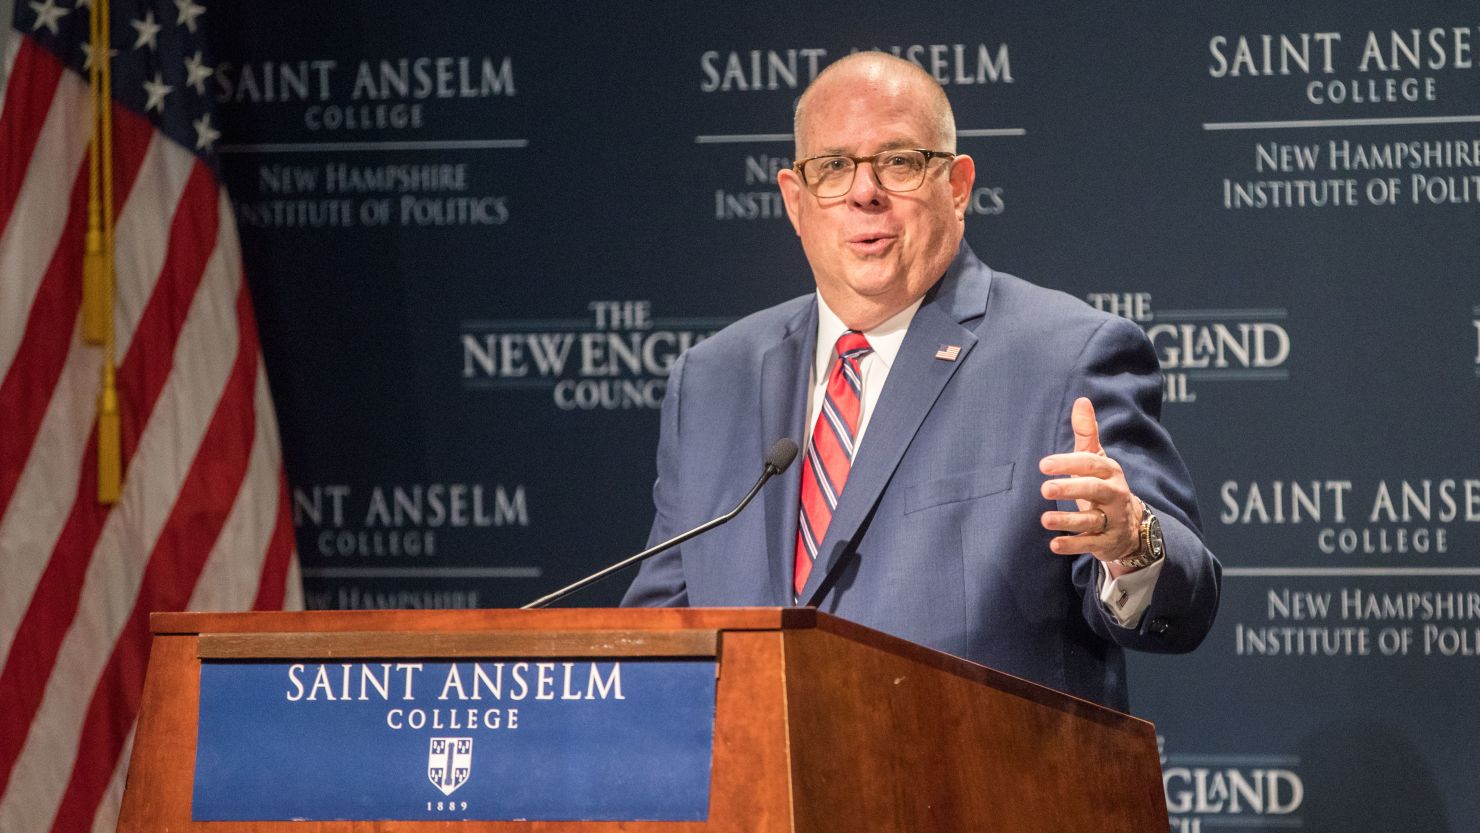  Maryland Governor Larry Hogan speaks at the New Hampshire Institute of Politics as he mulls a Presidential run on April 23, 2019 in Manchester, New Hampshire.  (Photo by Scott Eisen/Getty Images)